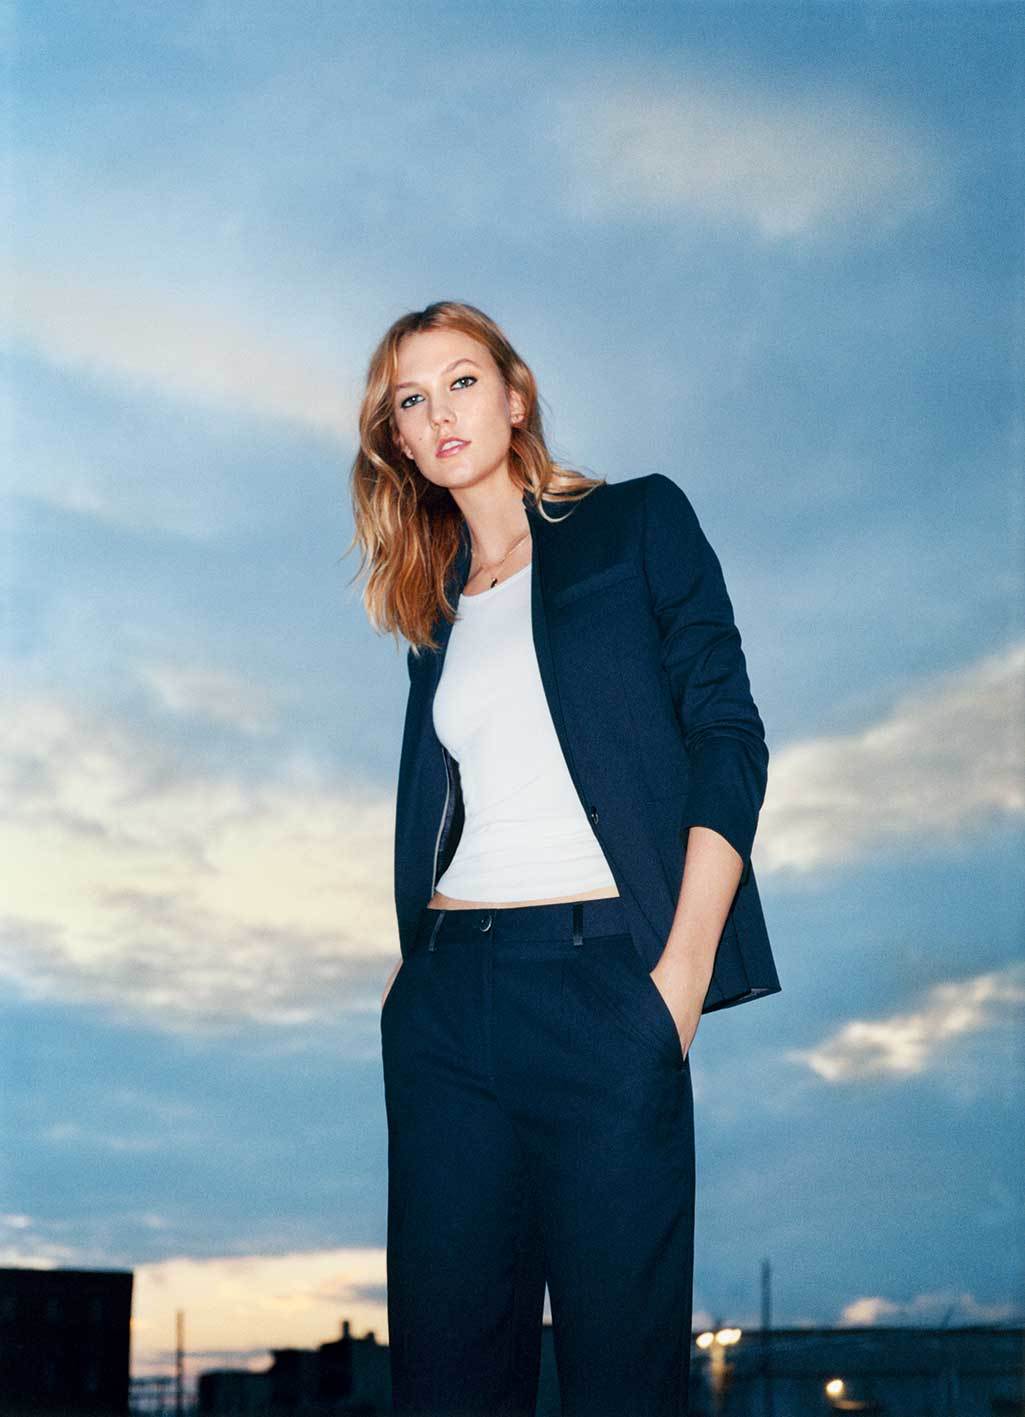 karlie kloss returns to her roots in topshop campaign - i-D